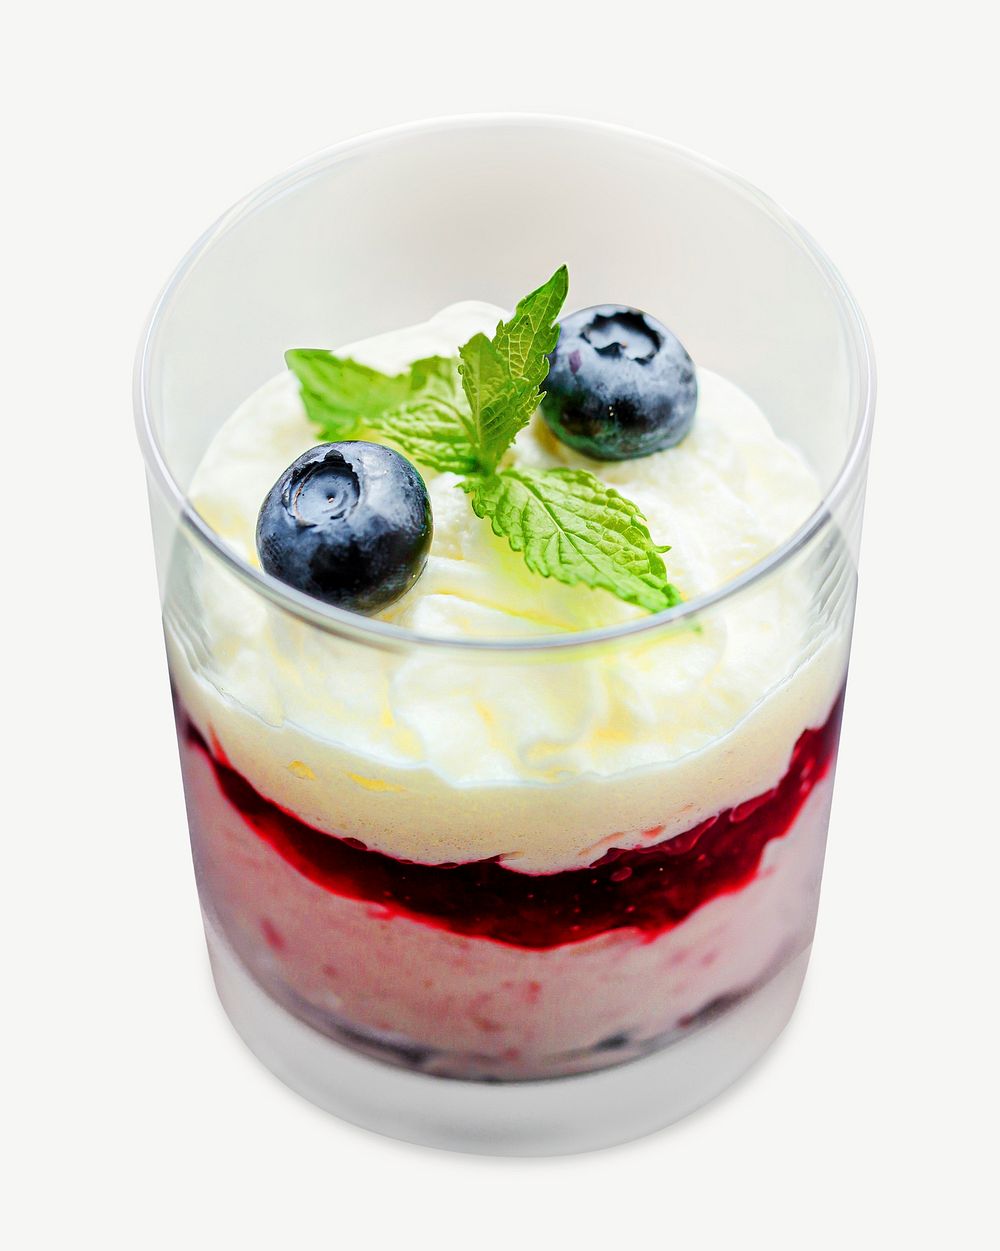 Blueberry mousse food element psd